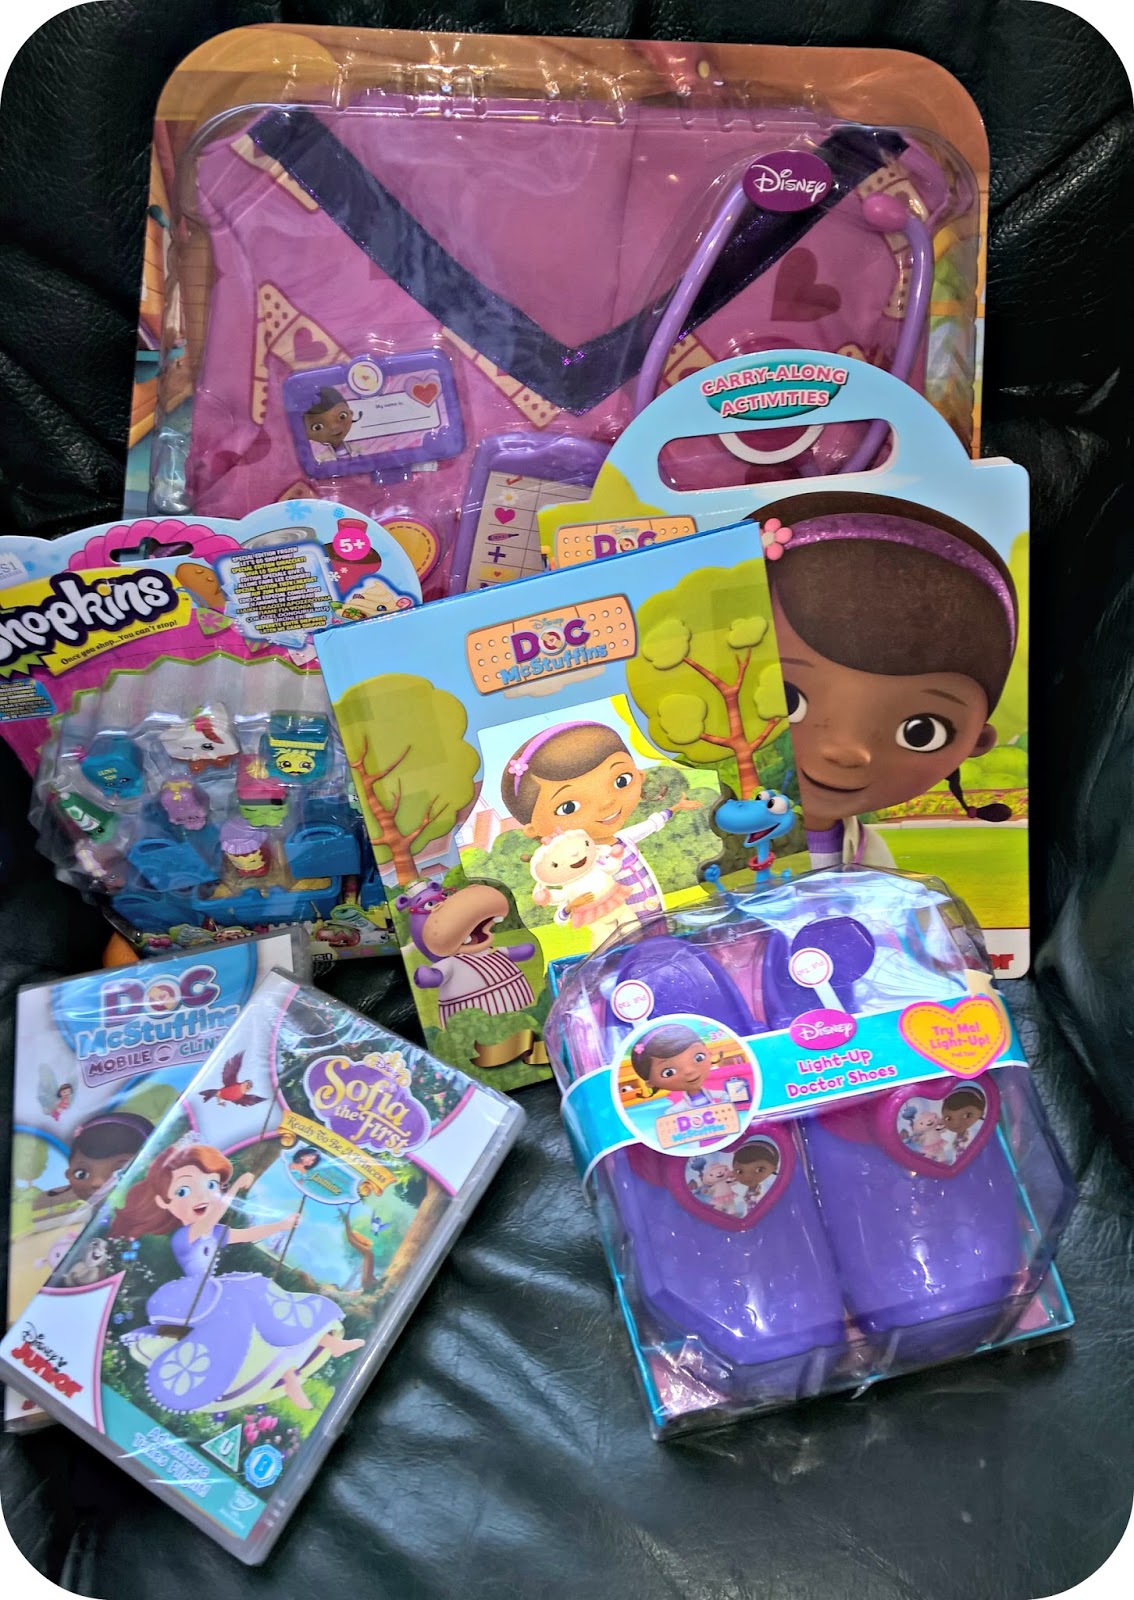 We are #DocMcStuffins Twitter Party Hosts